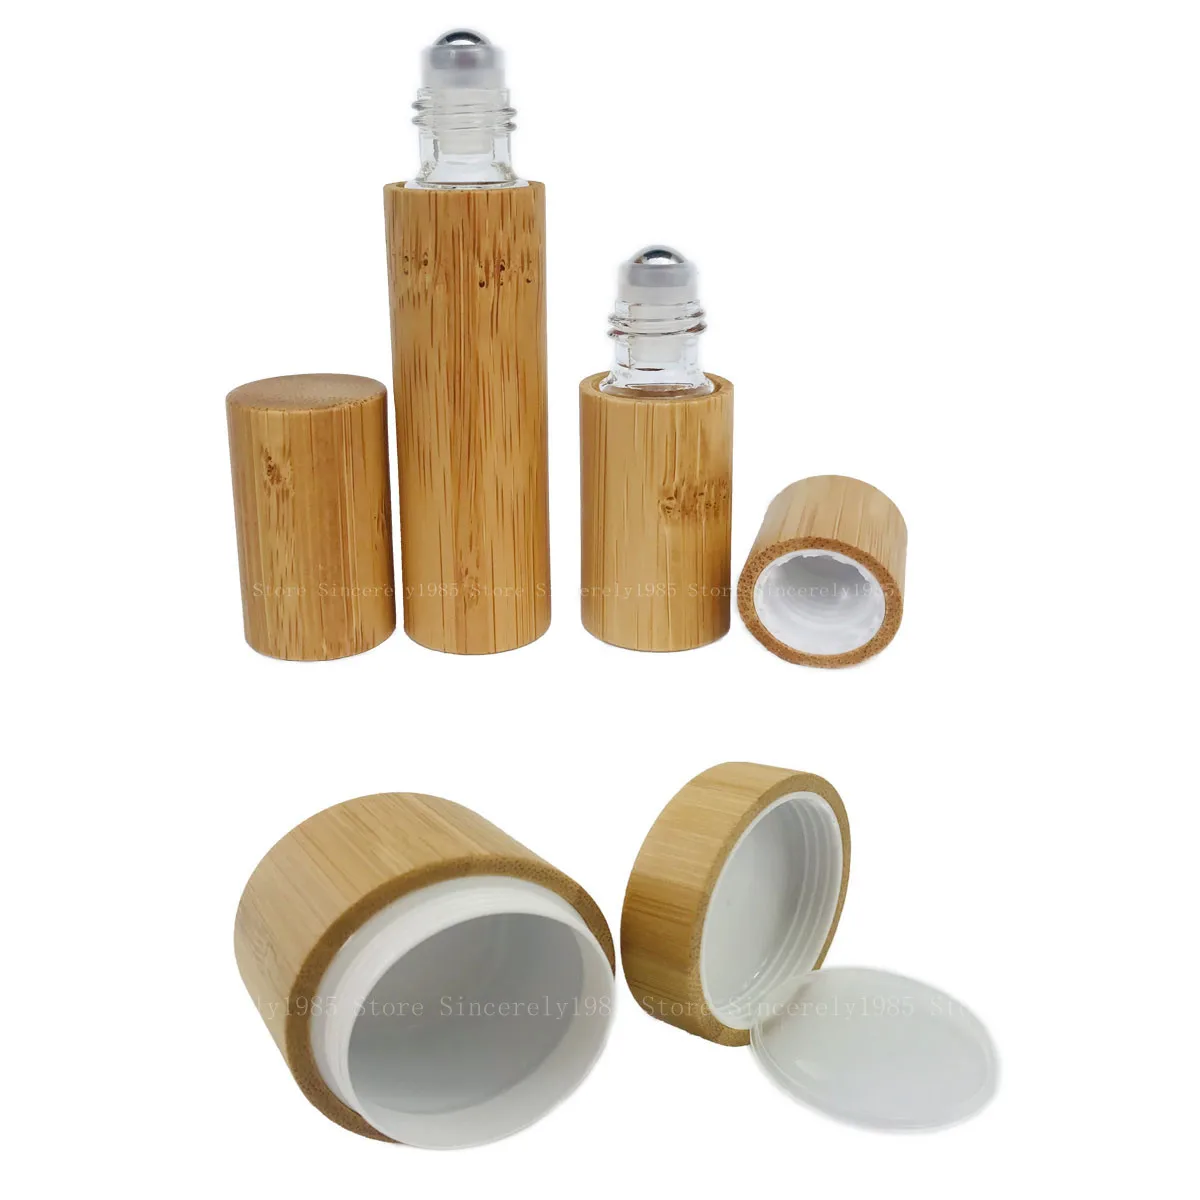 5ML 10ML Bamboo Wood Bottle Perfume Stainless Steel Roller Ball Aroma Diffuser Bottle, 30ml Face Cream Cosmetic Container Bottle hydrating instrument desktop wood 300ml usb aroma diffuser grain humidifier atomizer usb household humidifier humidifier